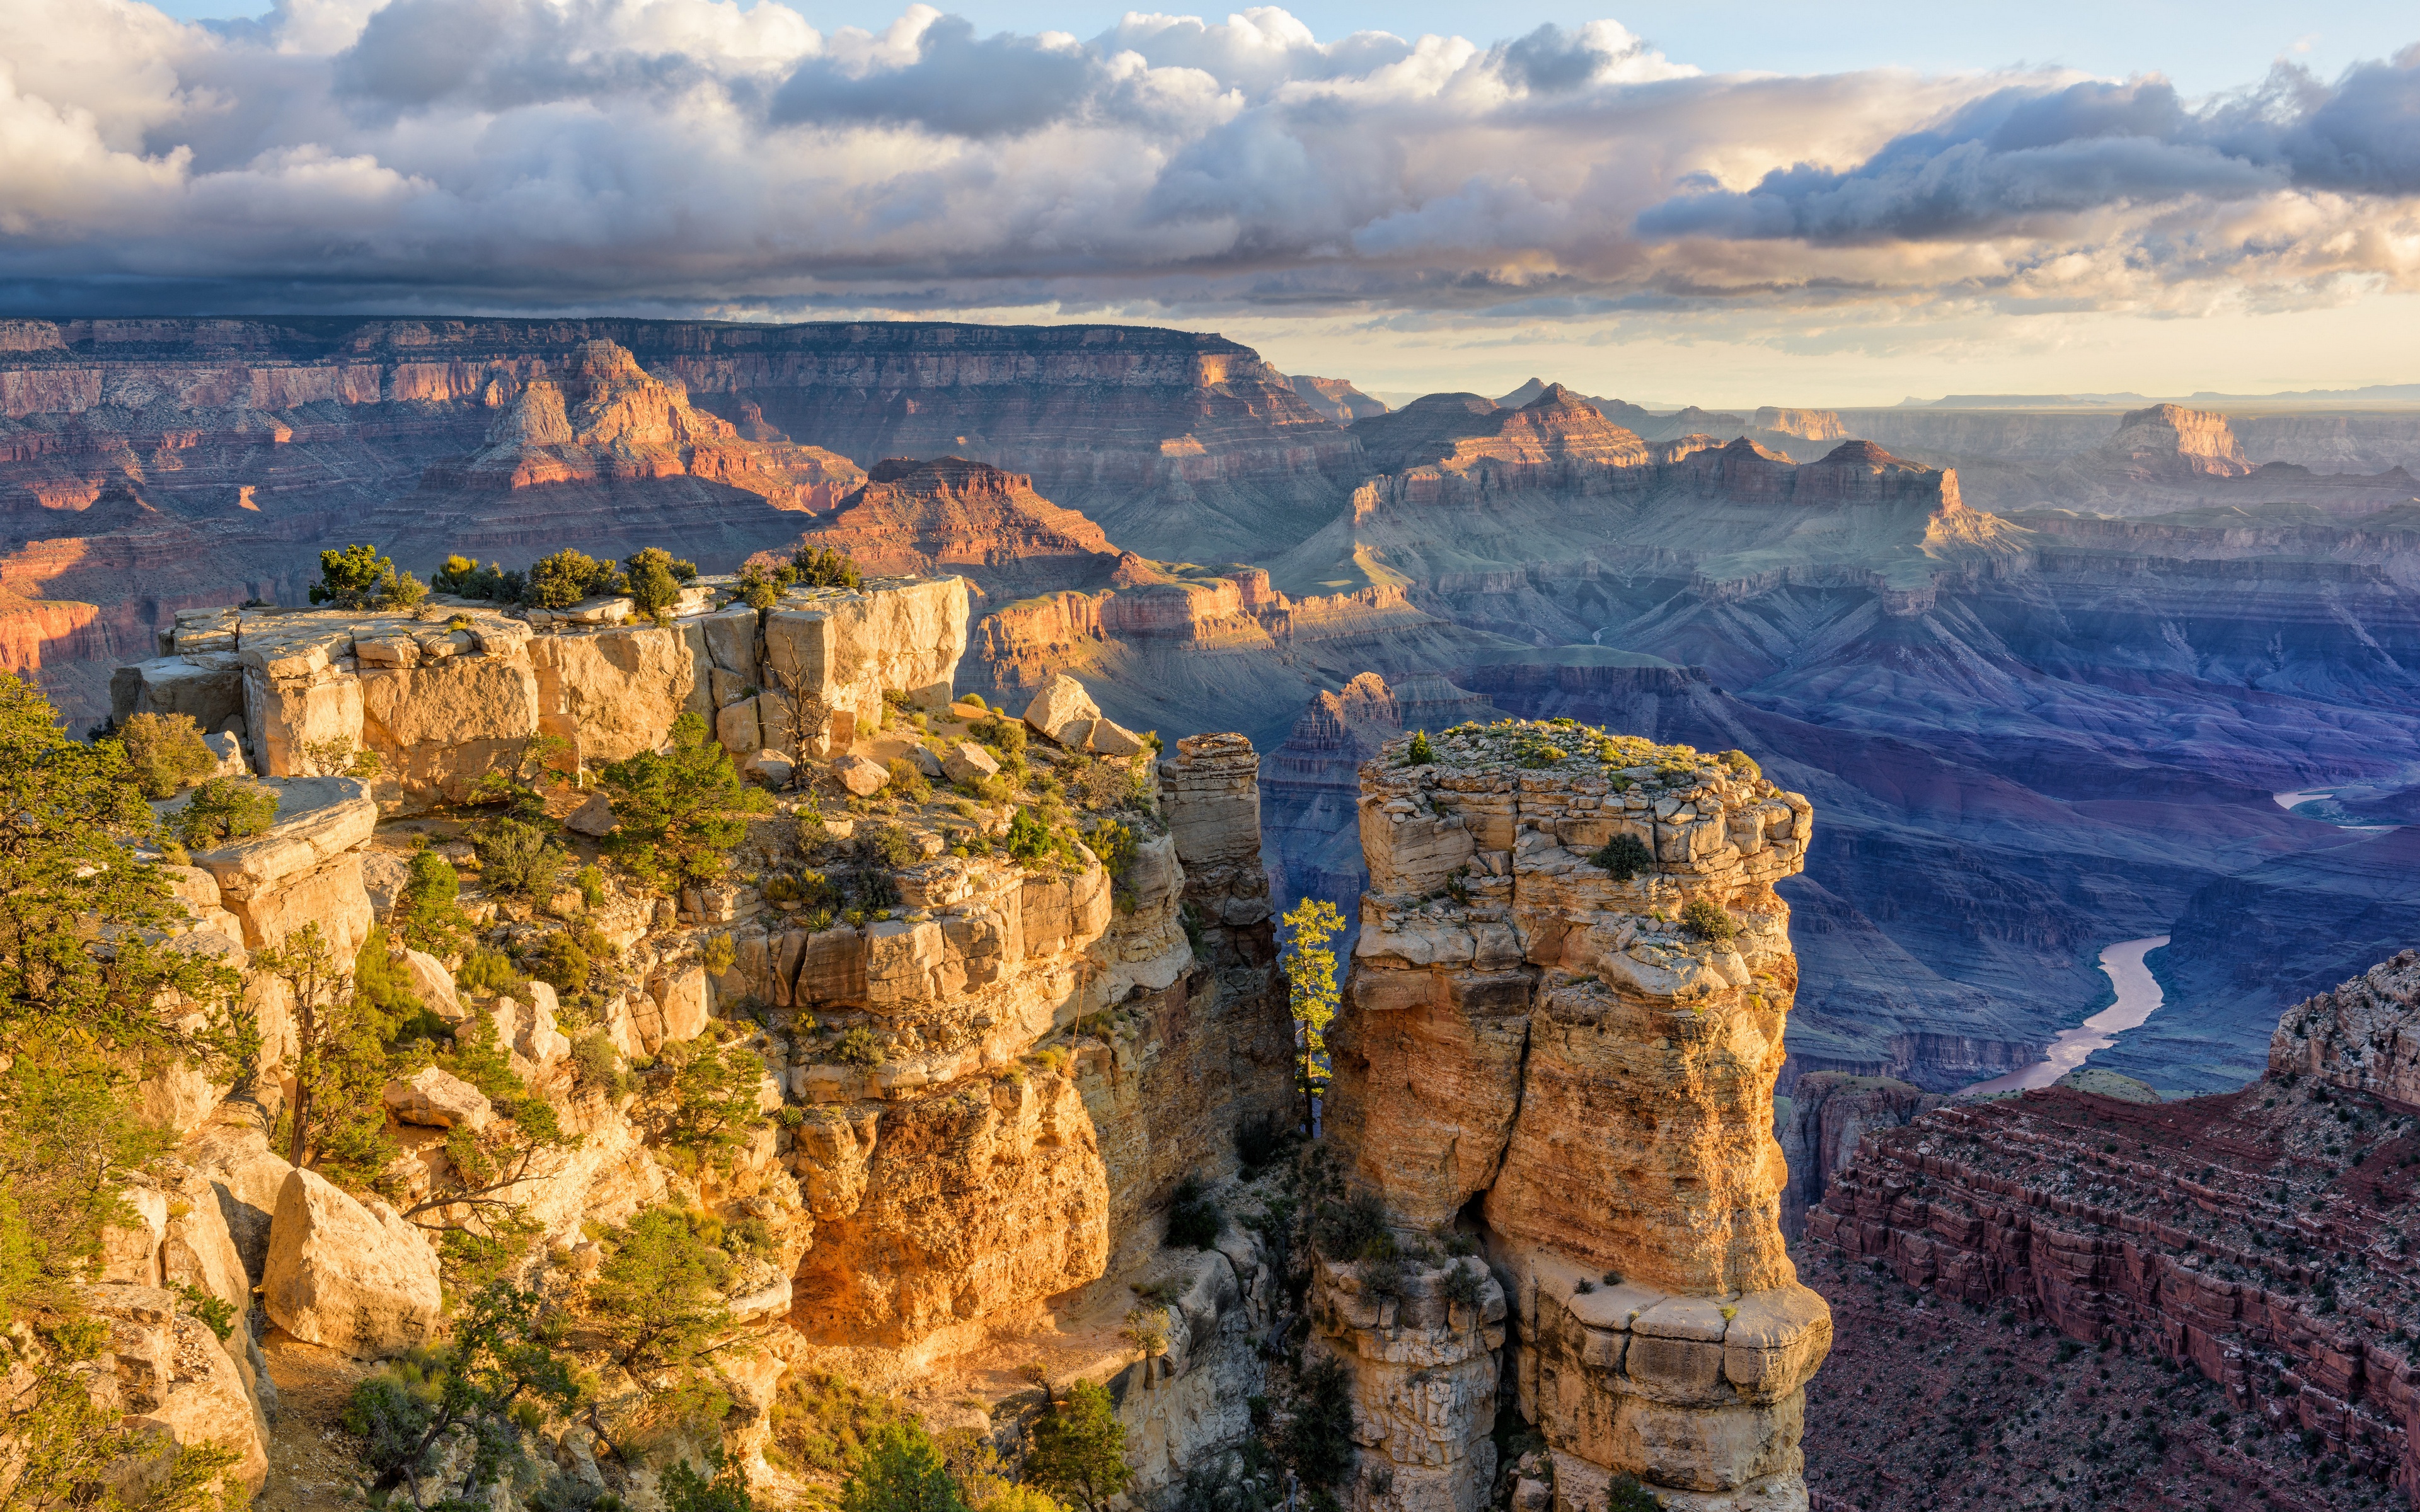 USA Grand Canyon Mountains Nature Landscape Sky Clouds Desert Rock Stones River 3840x2400